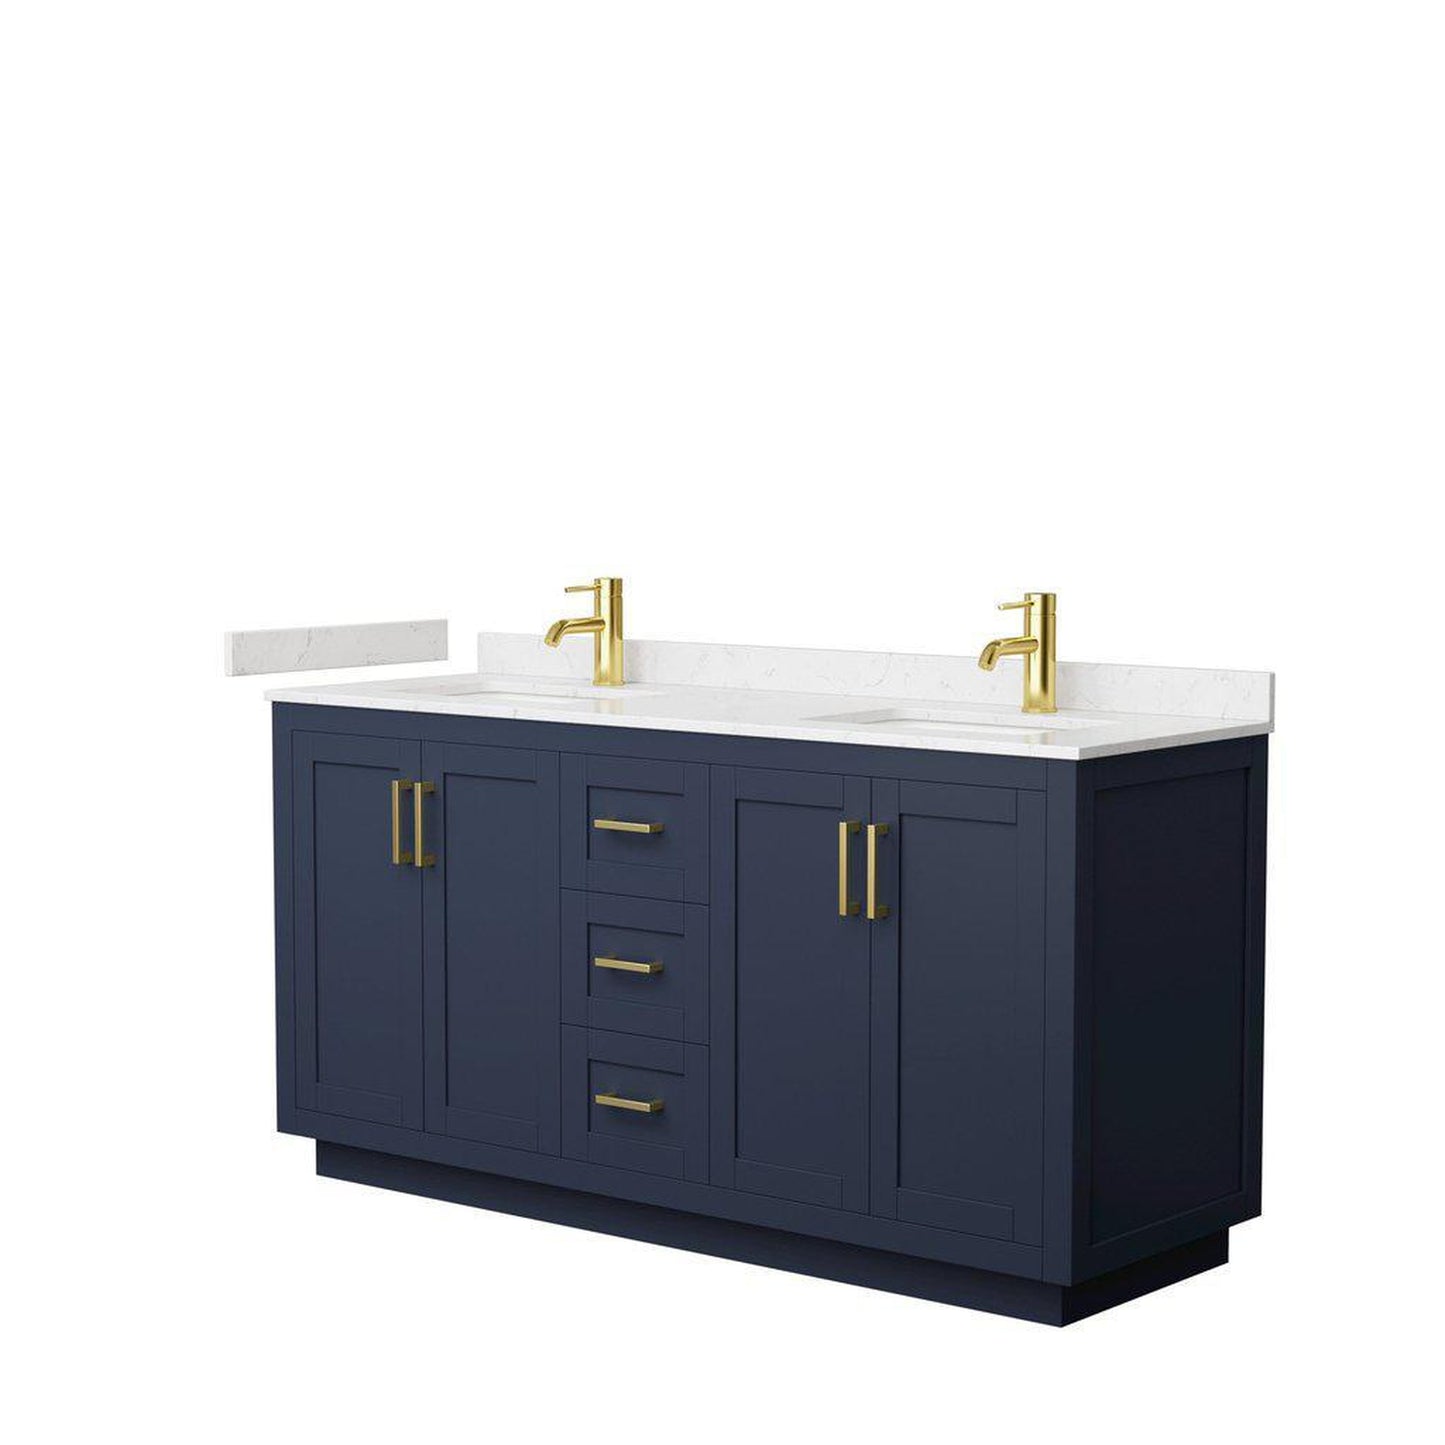 Wyndham Collection Miranda 66" Double Bathroom Dark Blue Vanity Set With Light-Vein Carrara Cultured Marble Countertop, Undermount Square Sink, And Brushed Gold Trim